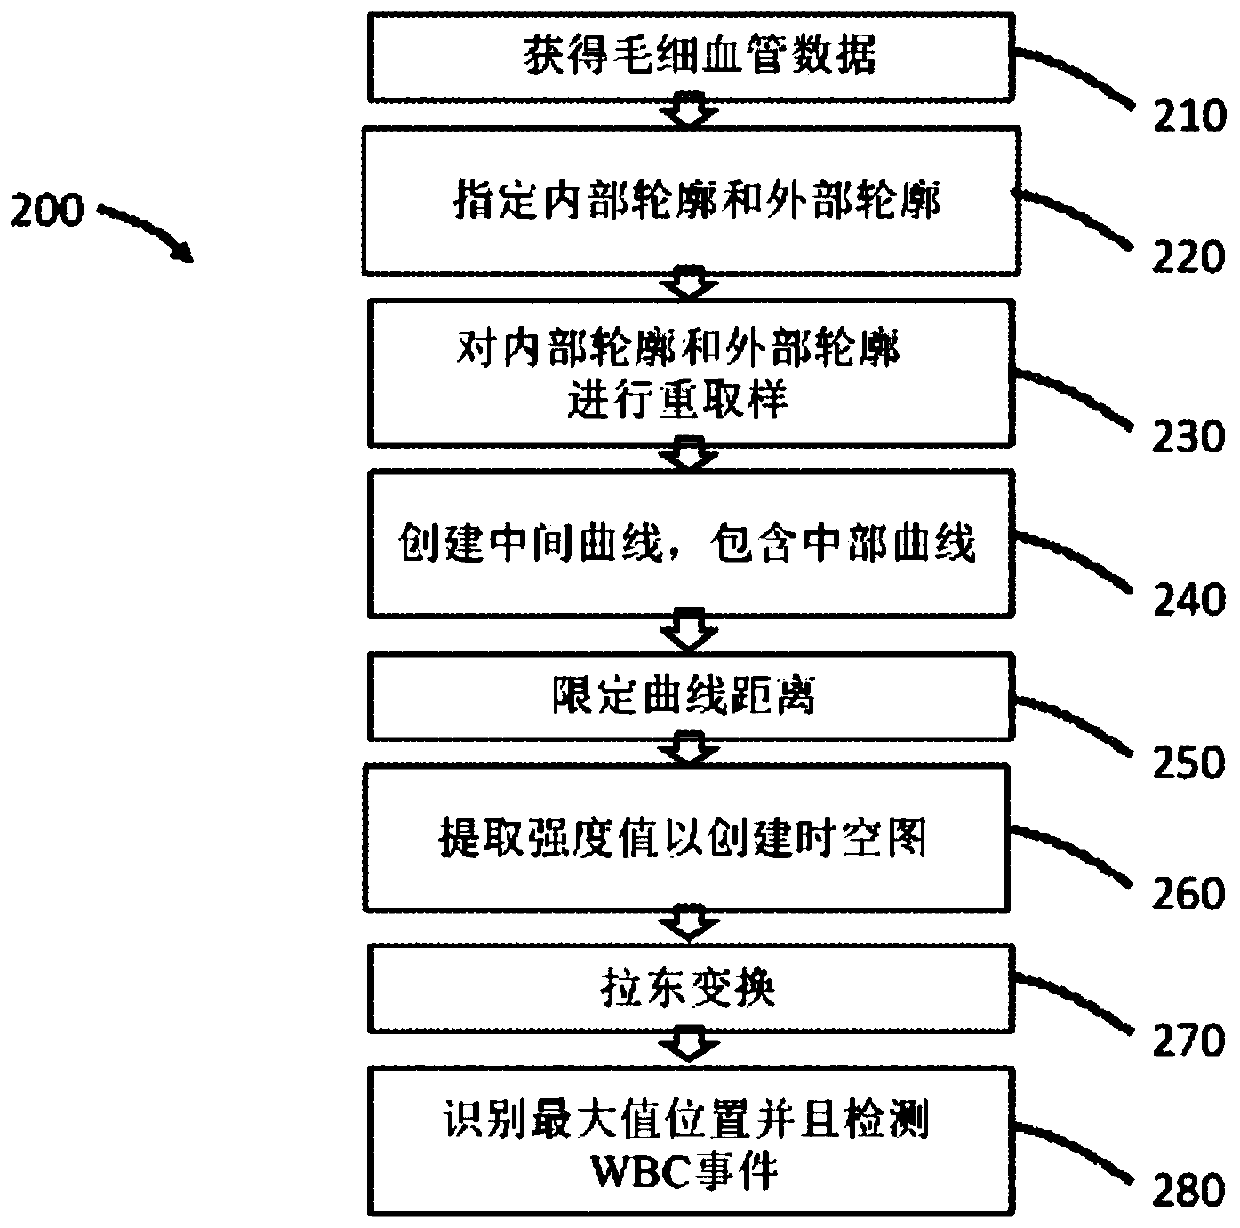 Systems, devices and methods for non-invasive hematological measurements